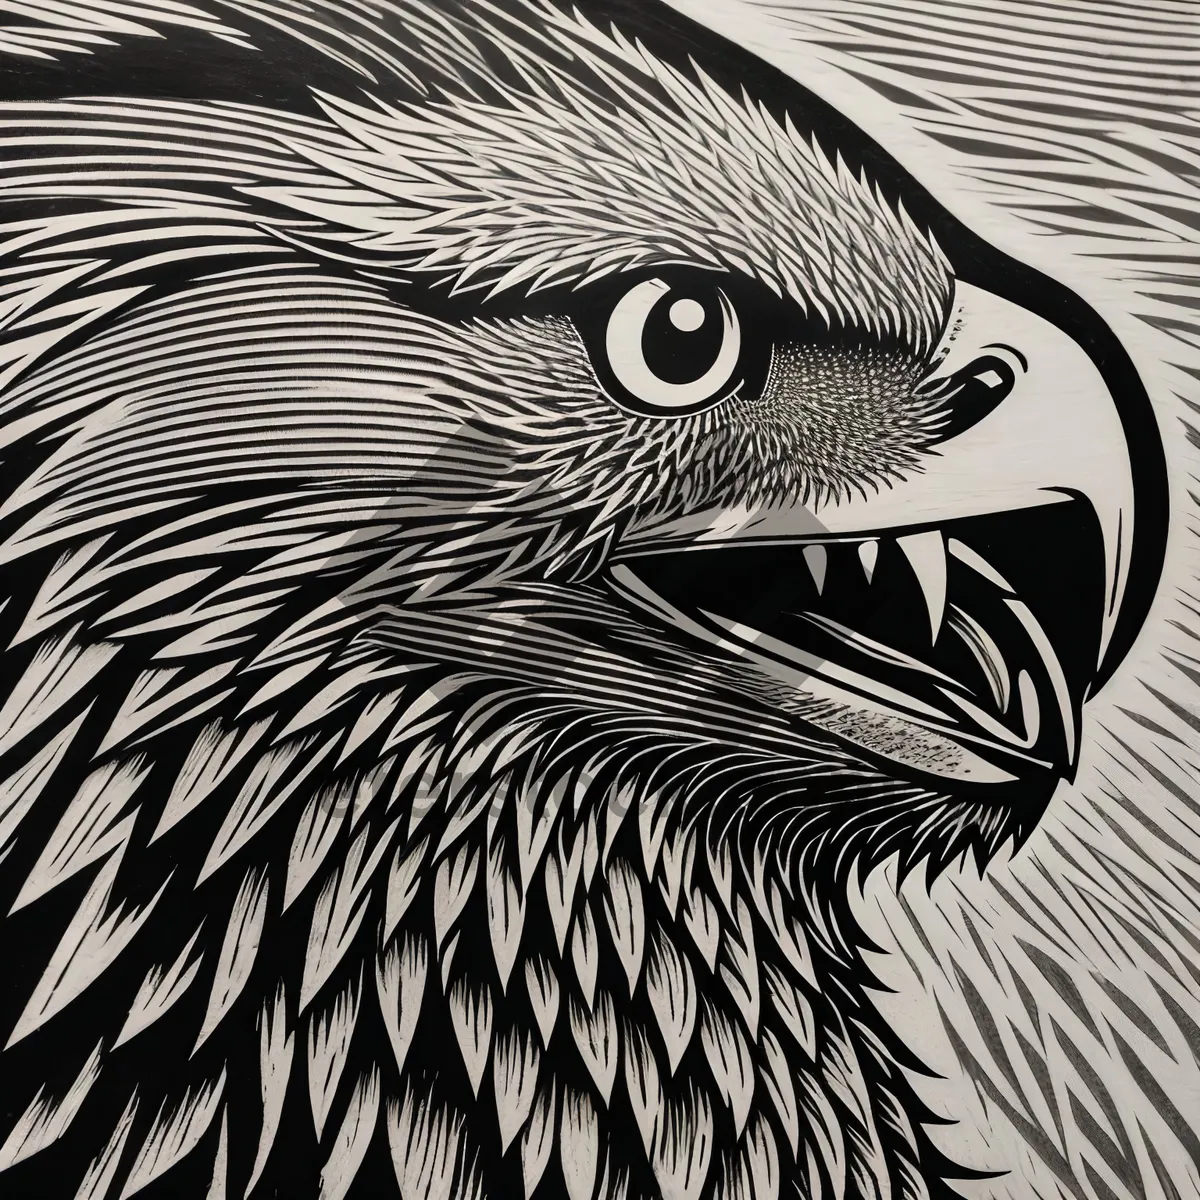 Picture of Wild Eagle Staring Intensely with Piercing Eyes